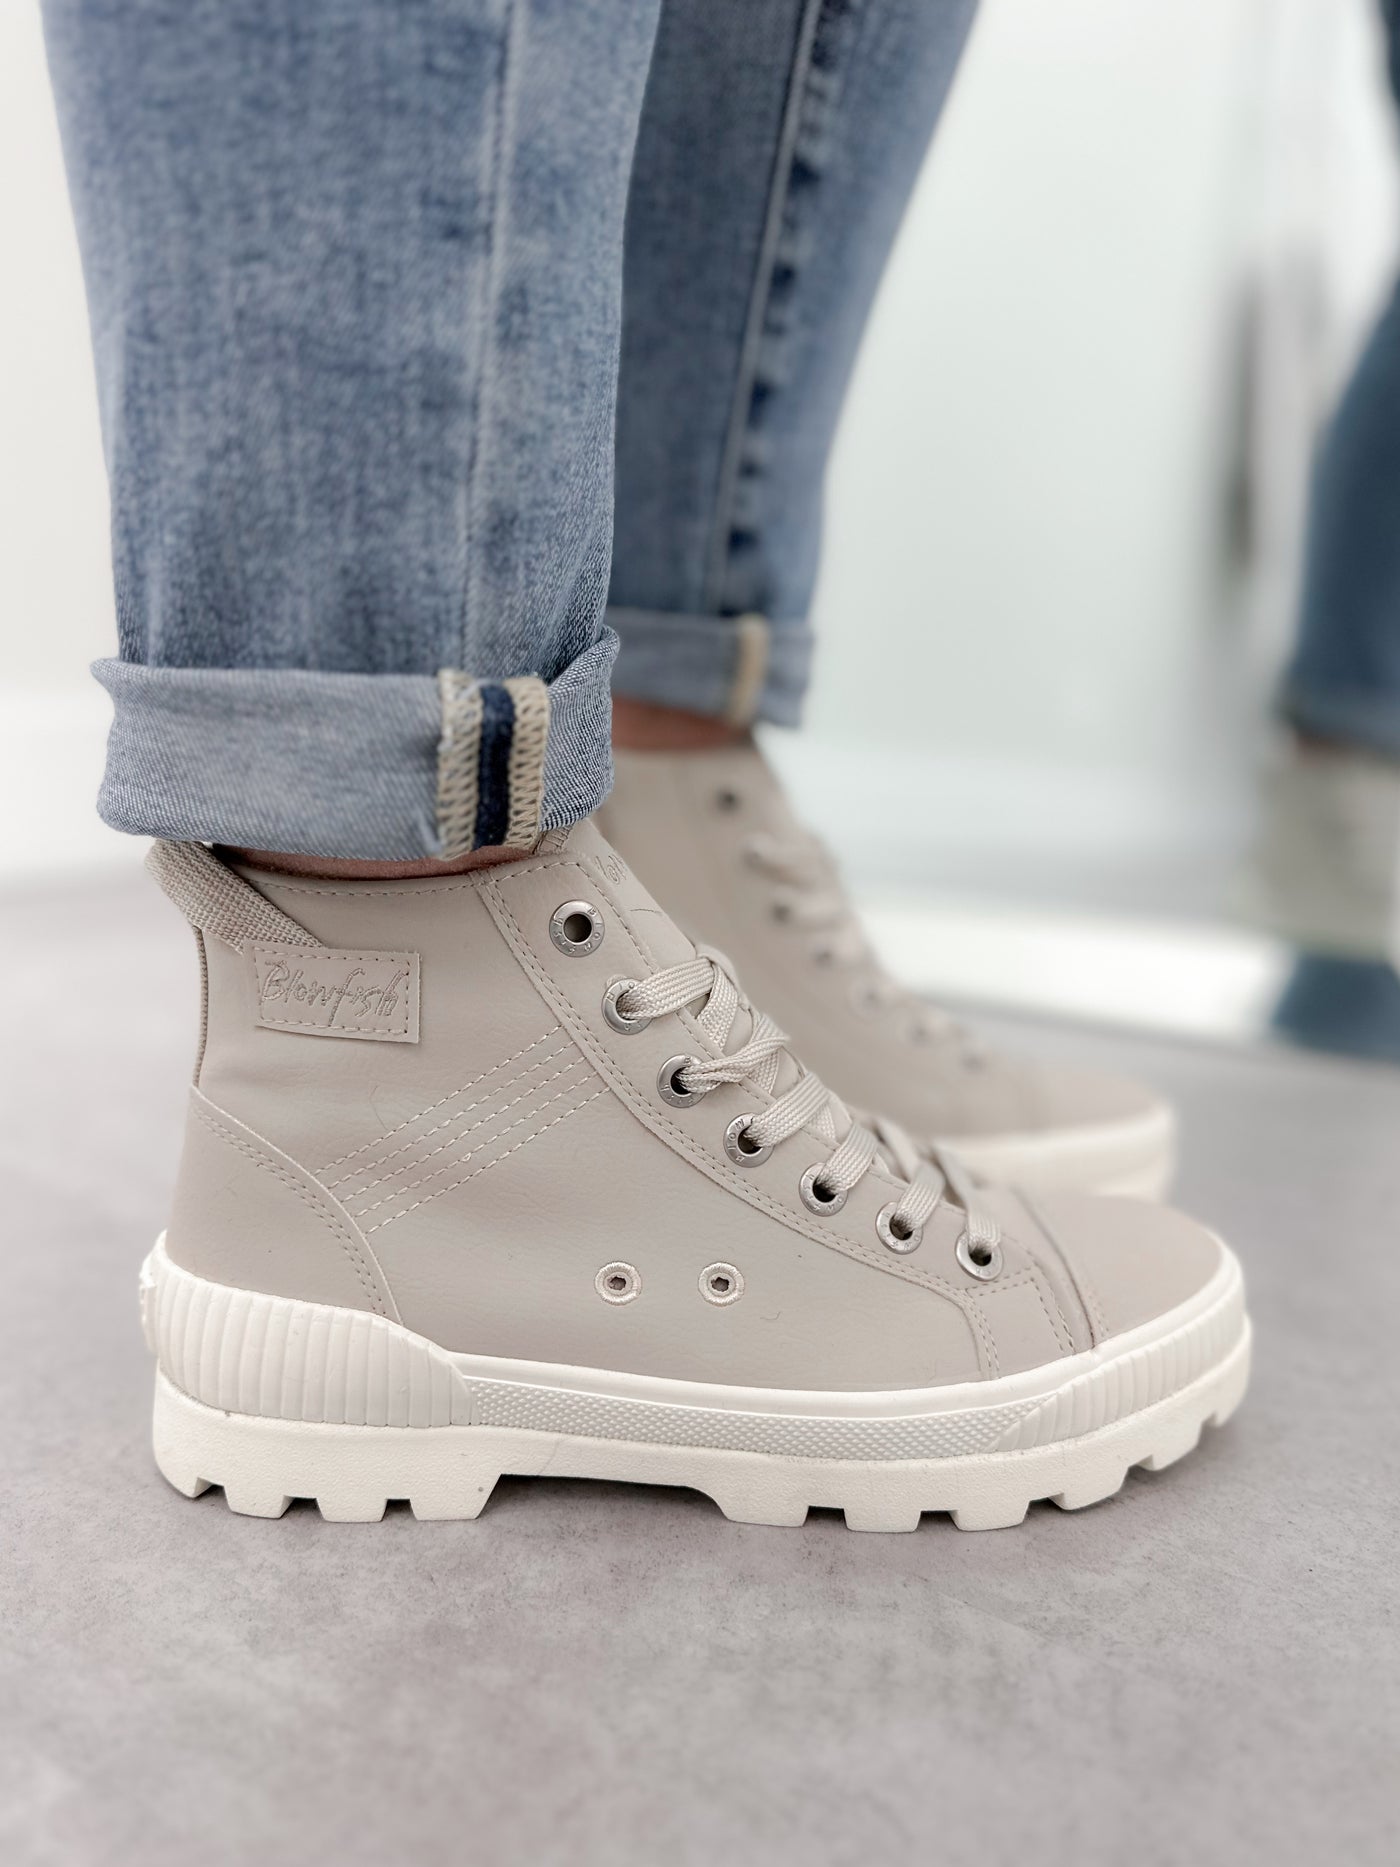 Forever Sneaker in Taupe by Blowfish